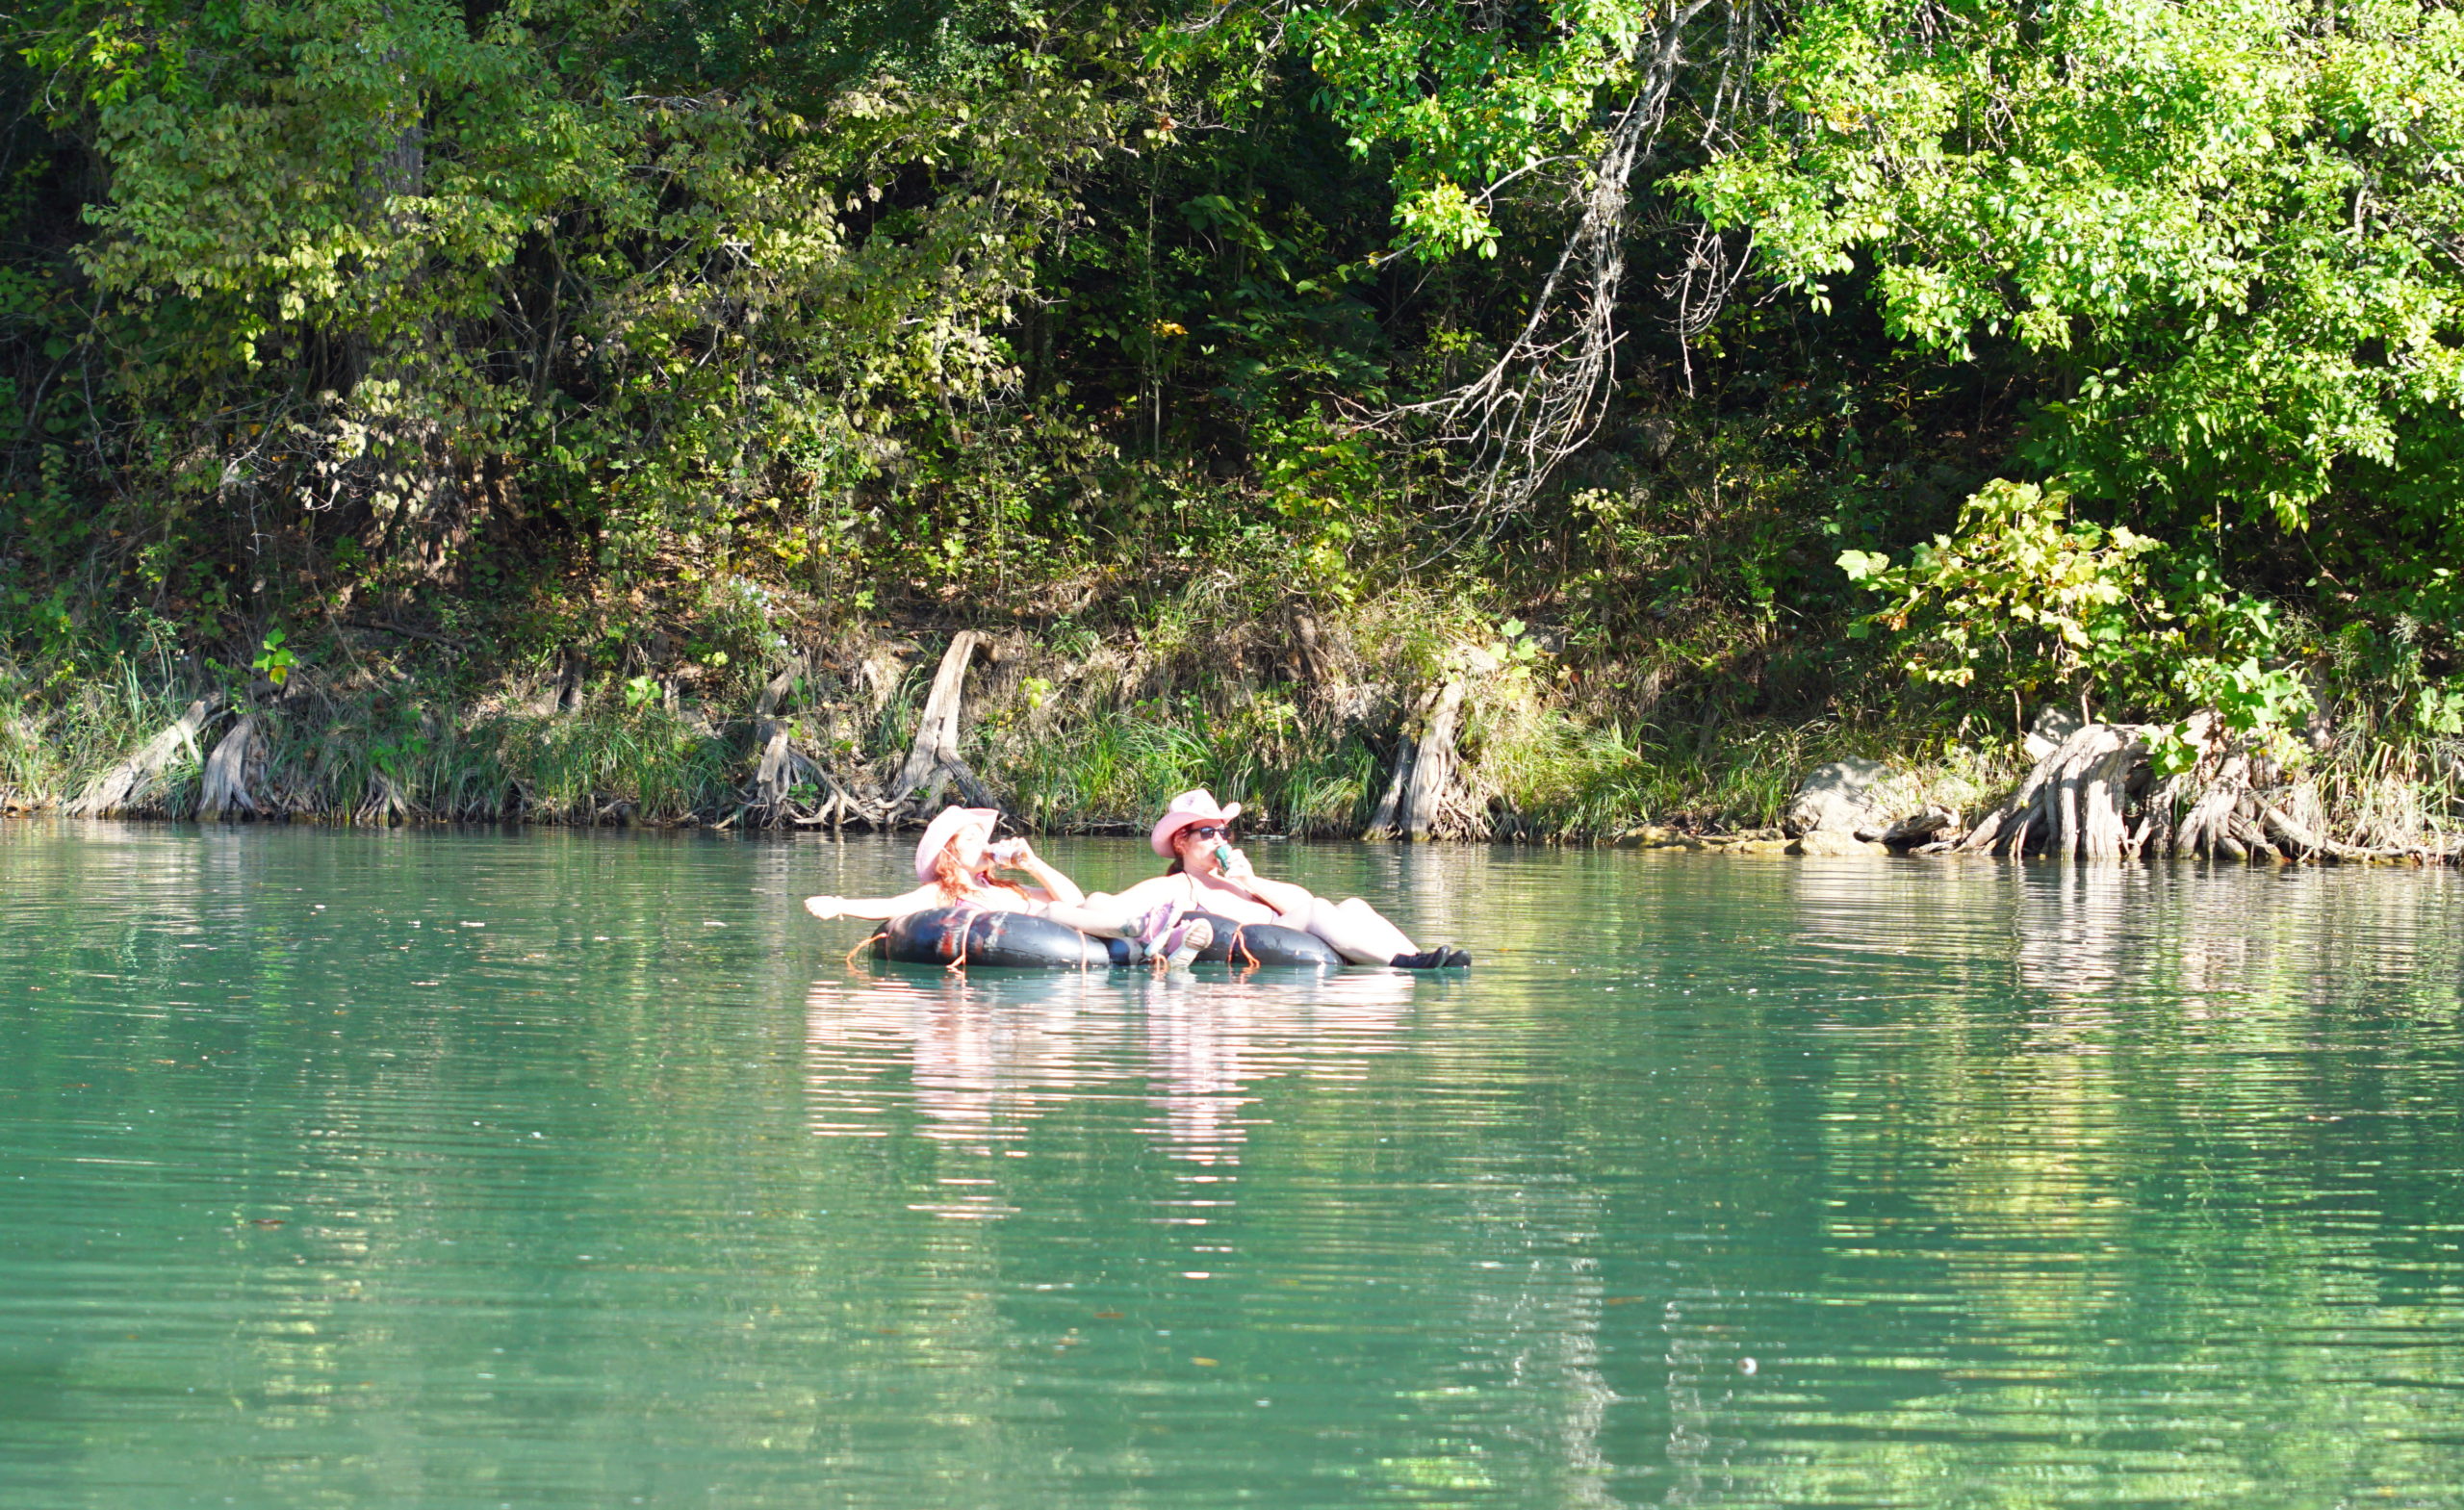 Tubing with friends on the mighty Guadalupe.